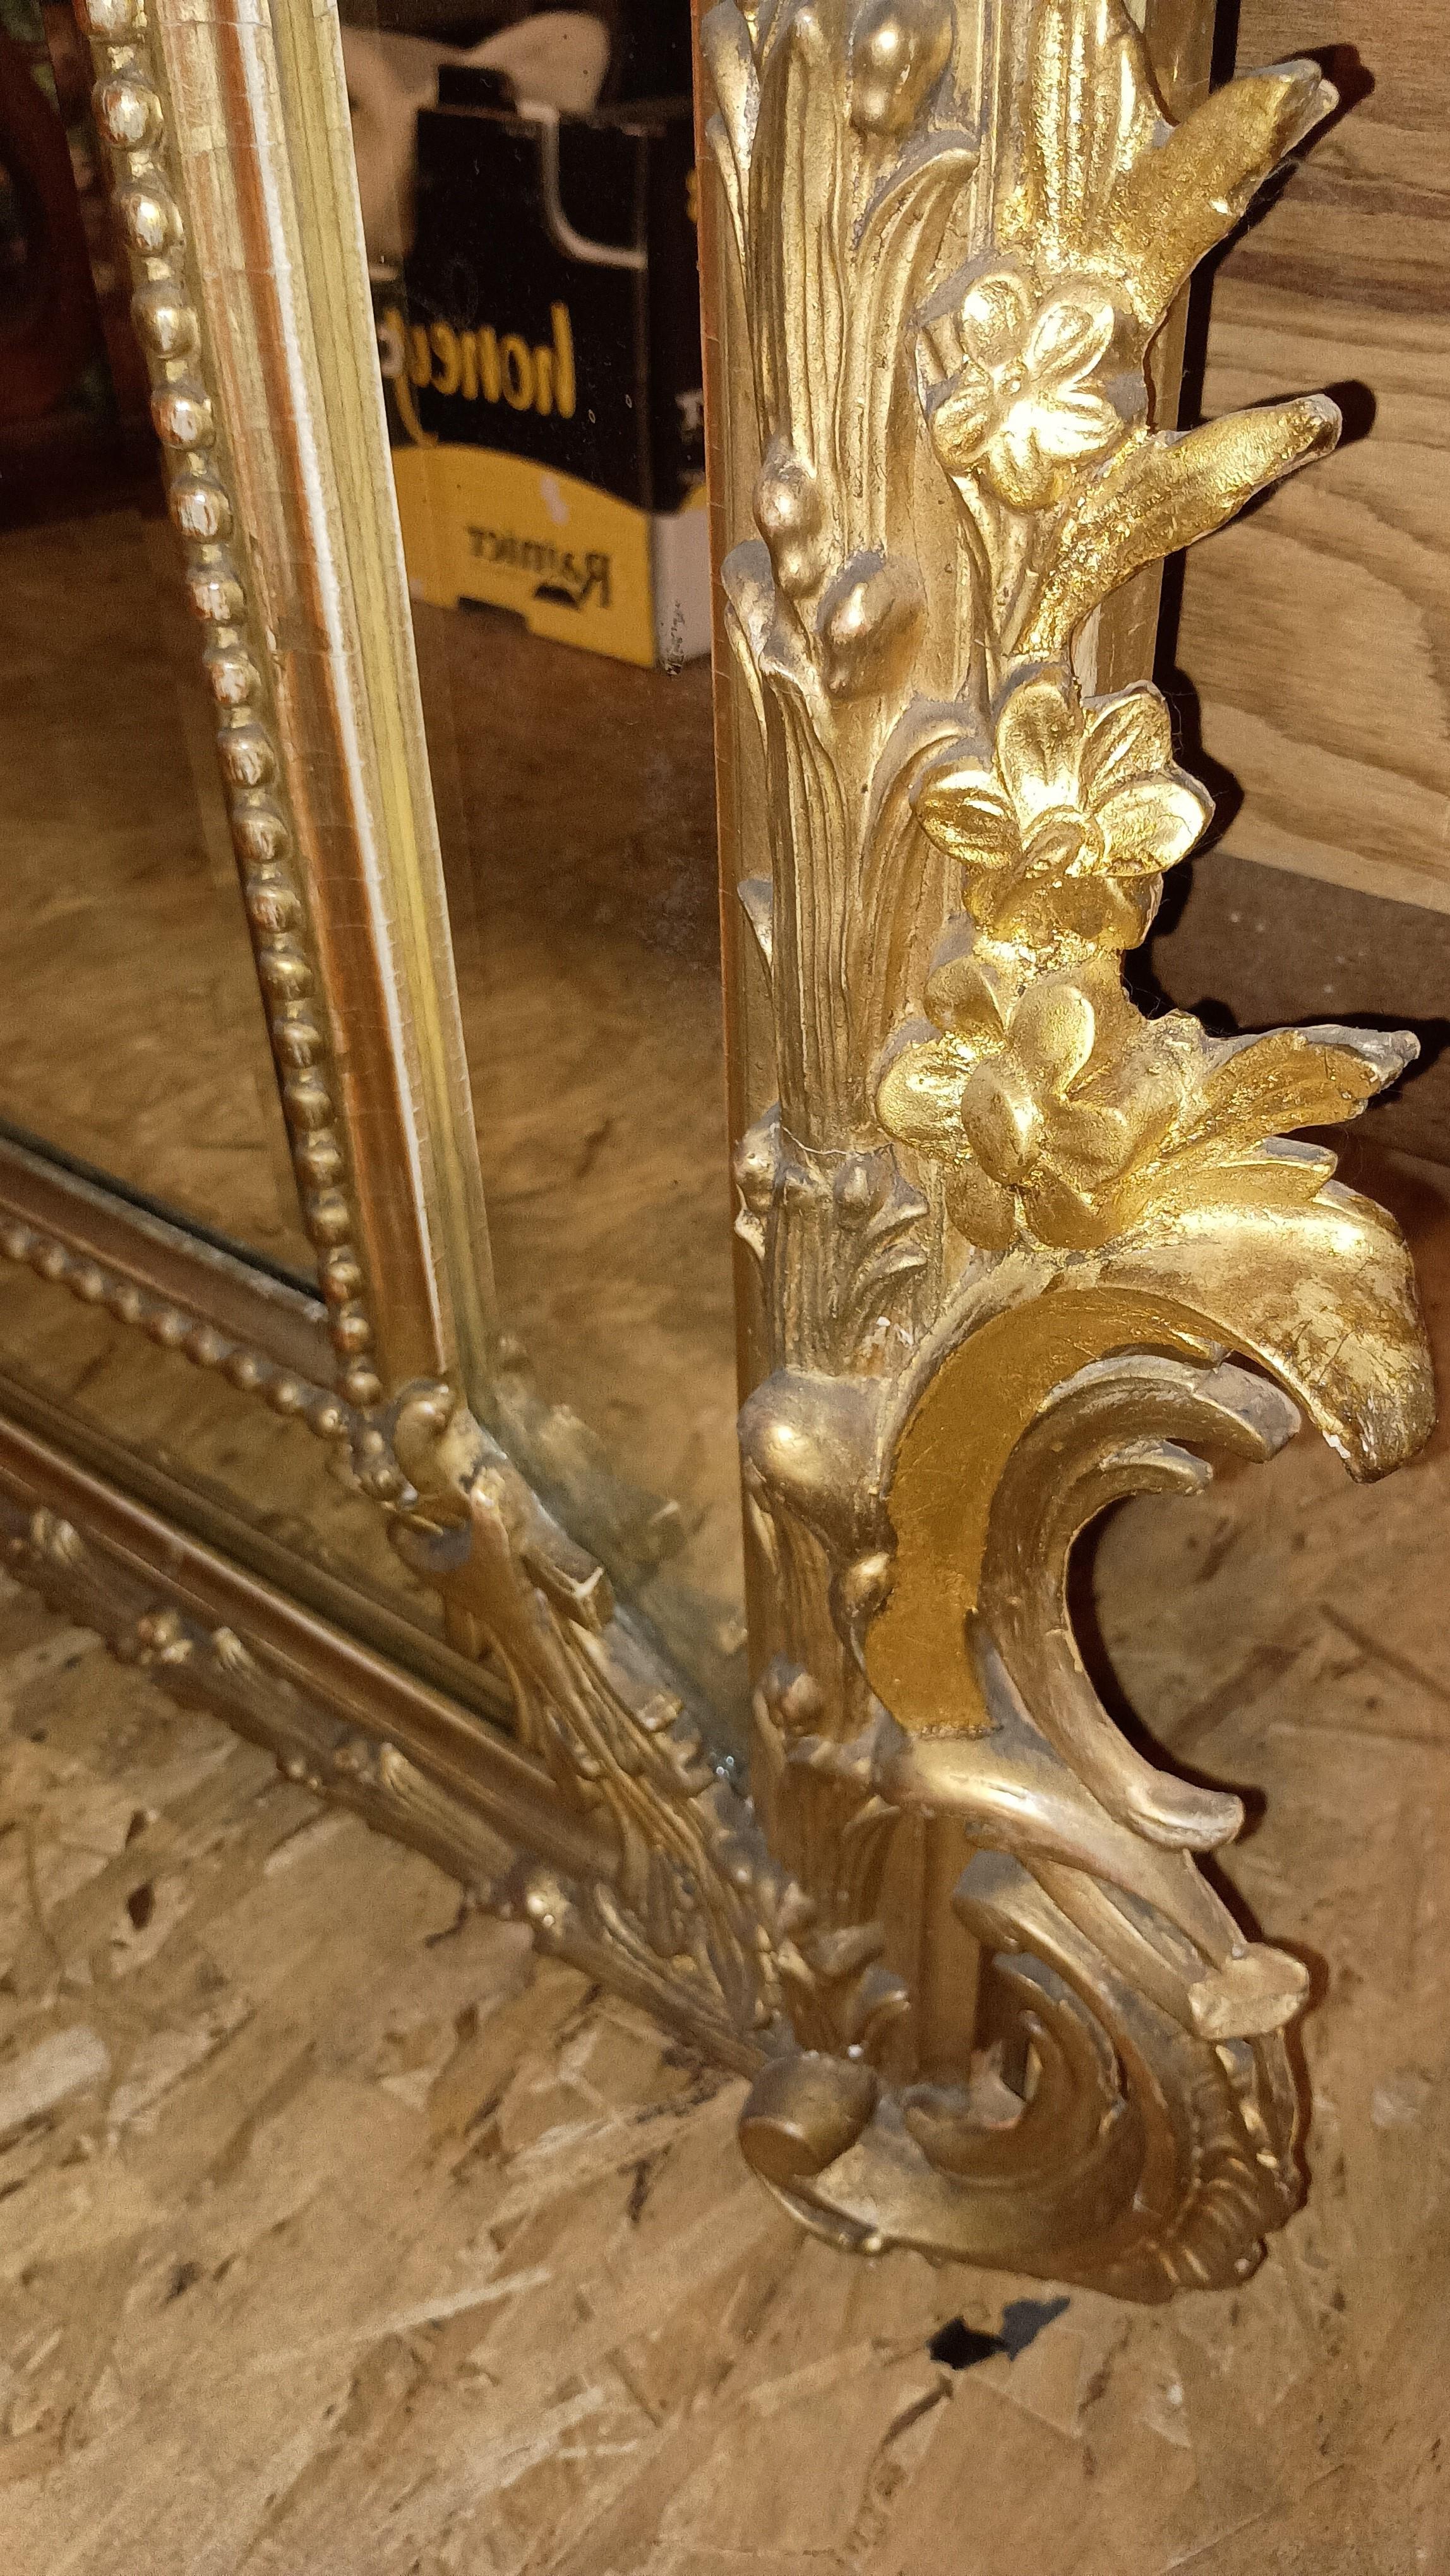 19th Century Gilt Mirror with Faceted Glass In Good Condition For Sale In Clinton Twp, MI